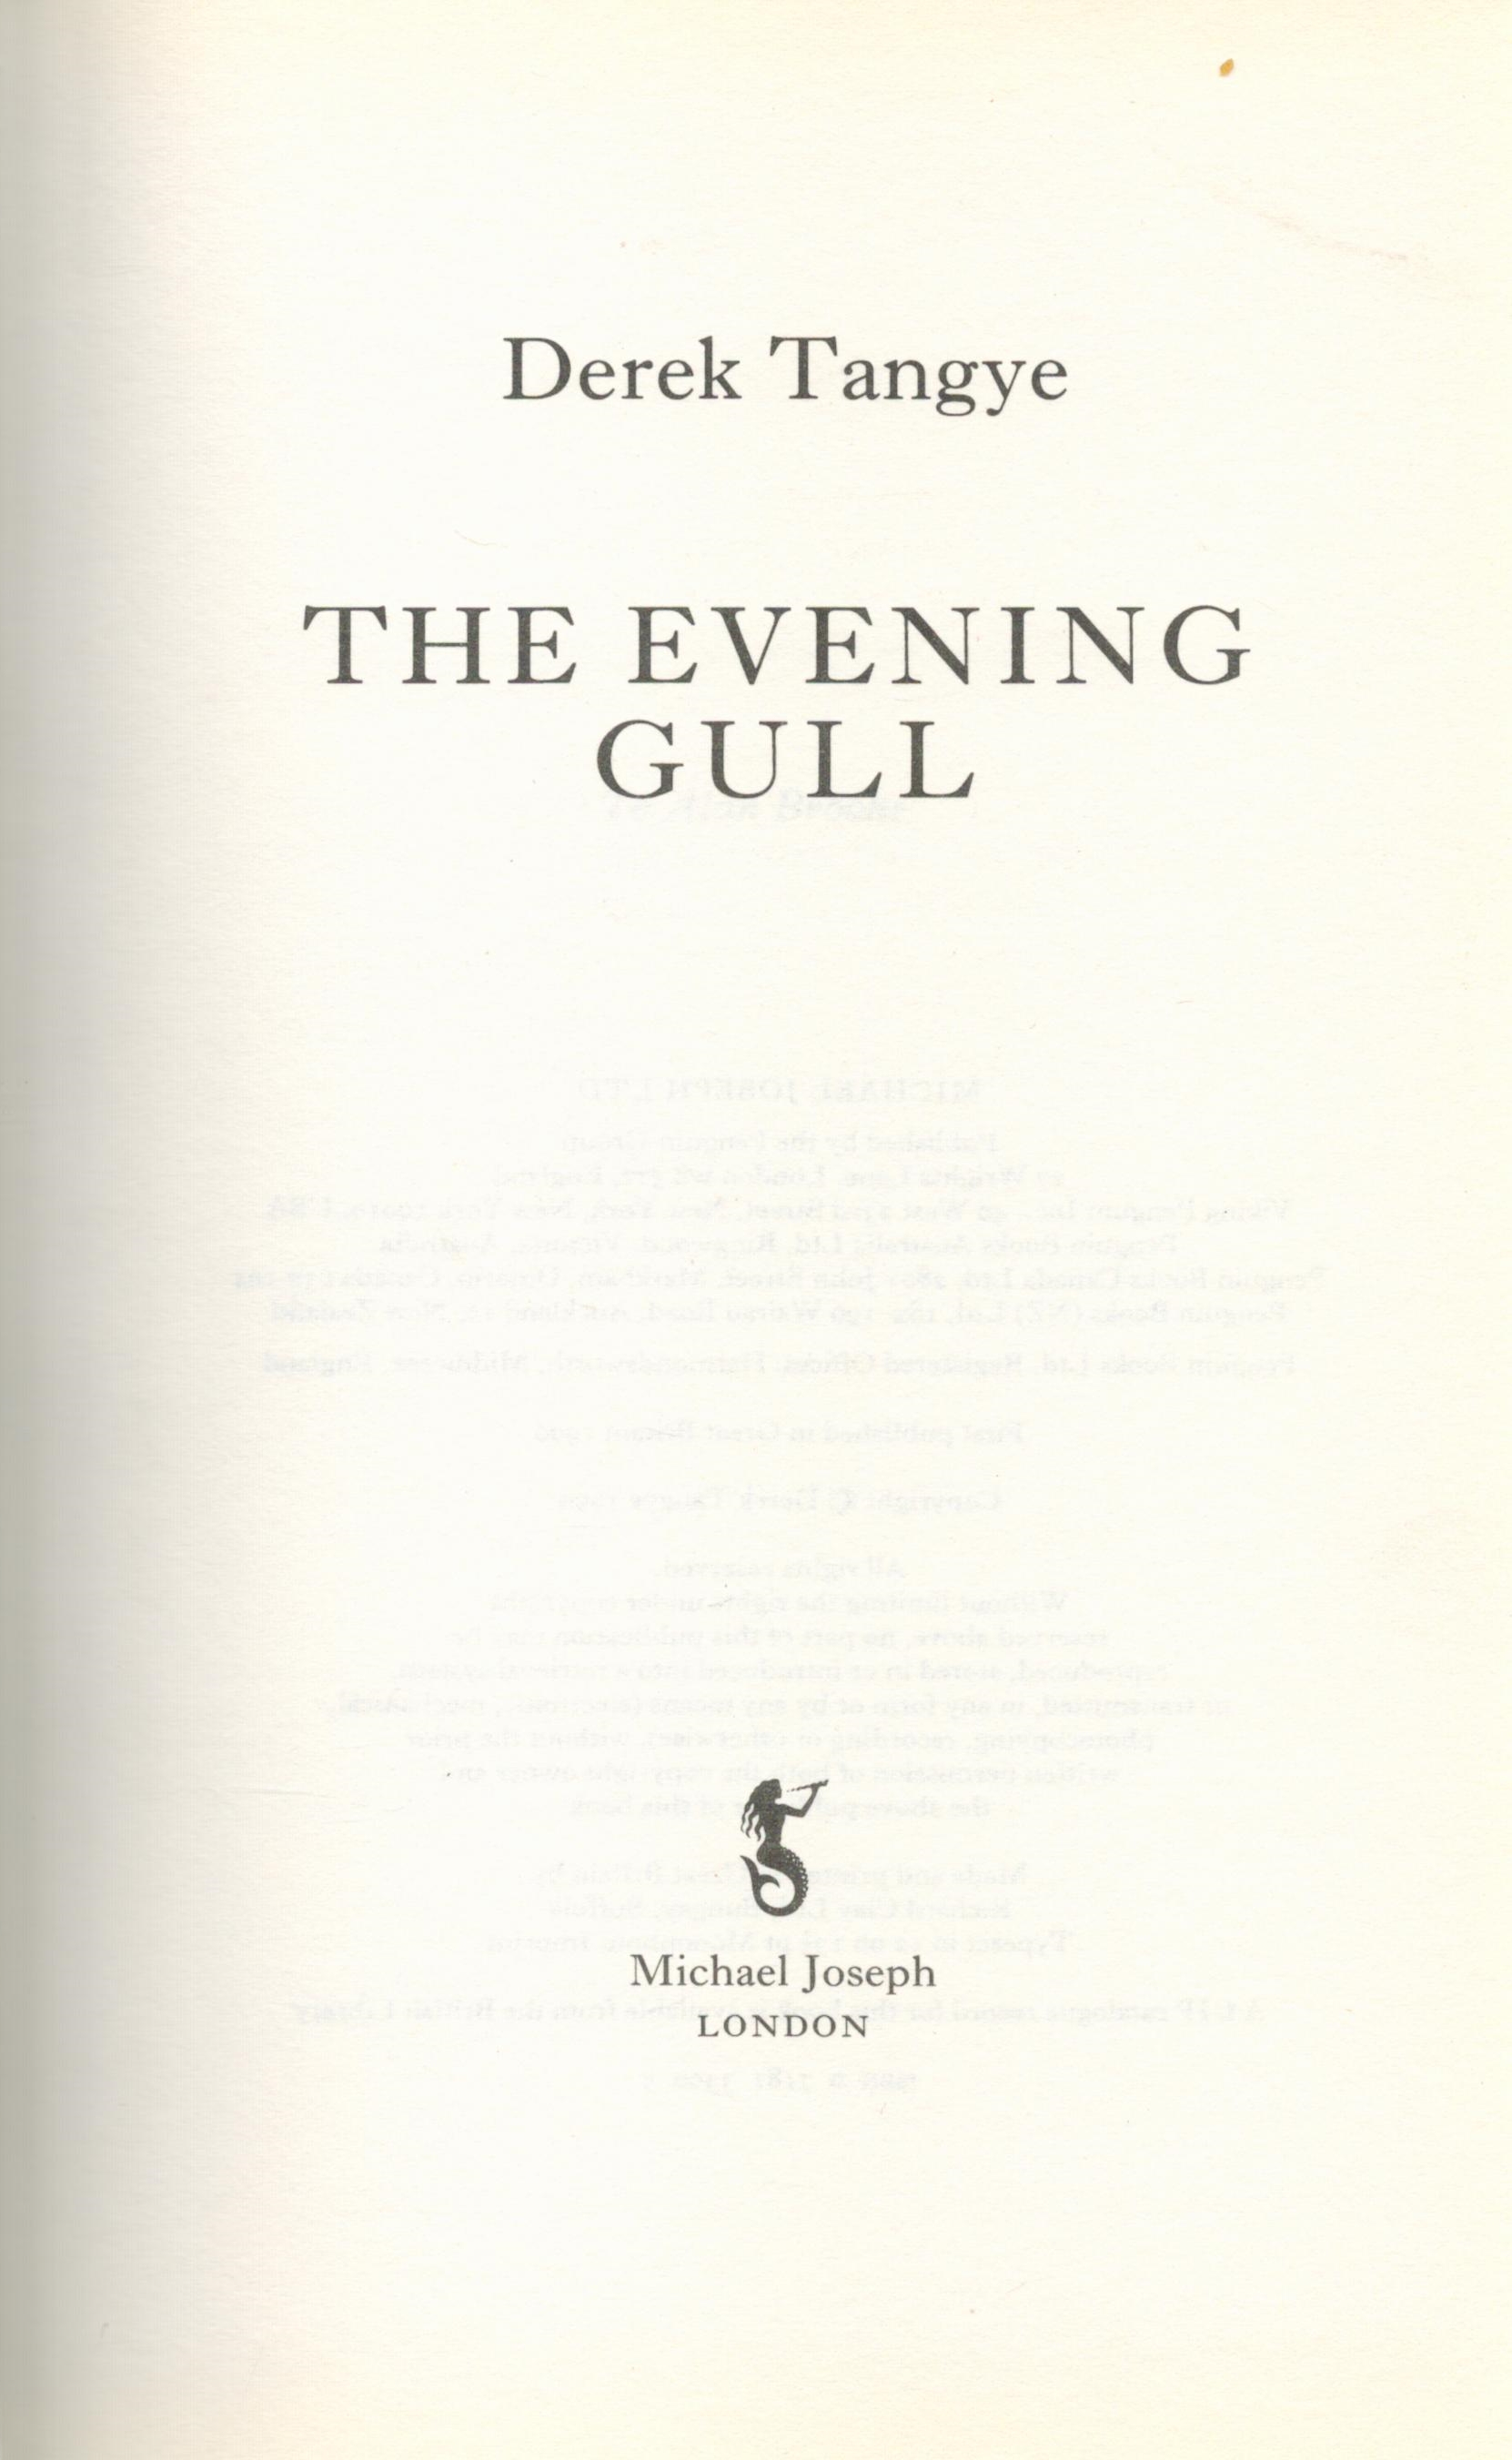 Signed Book Derek Tangye The Evening Cull Hardback Book 1990 First Edition Signed by Derek Tangye on - Image 3 of 4